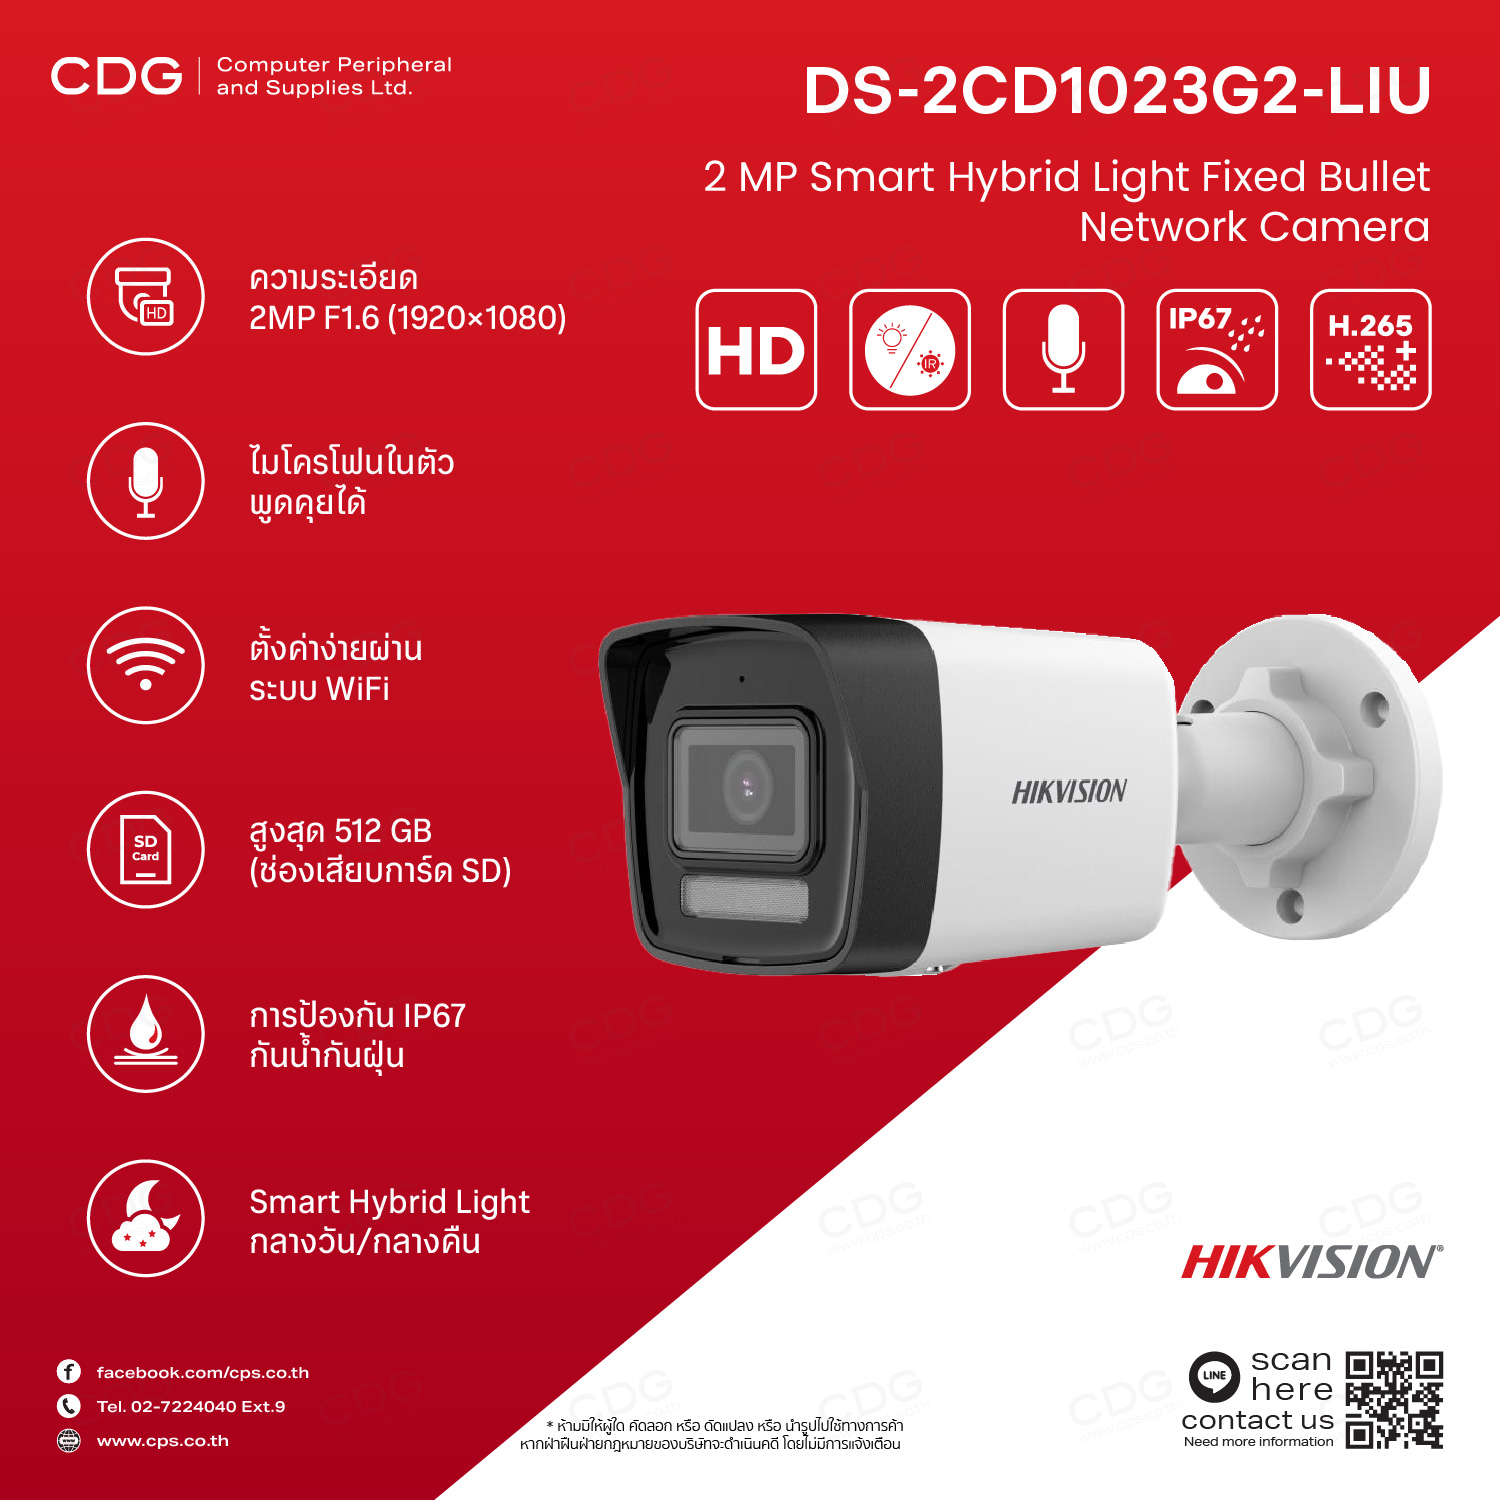 Hikvision DS-2CD1023G2-LIU 2MP Fixed Bullet Network